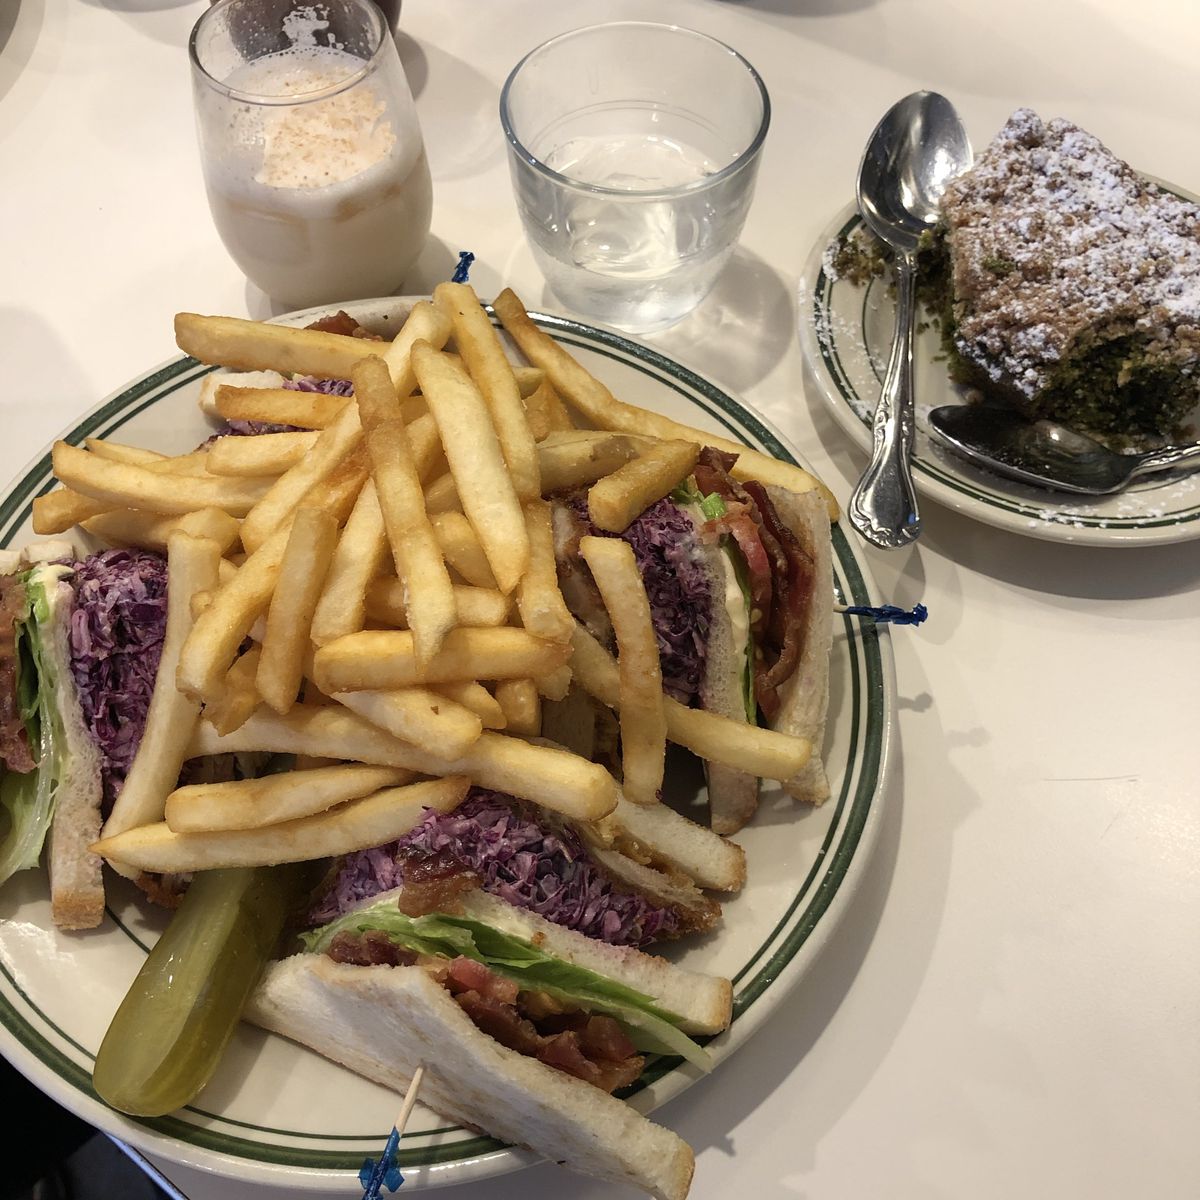 A white plate stuffed with four pieces of a club sandwiches, french fries, and a pickle.